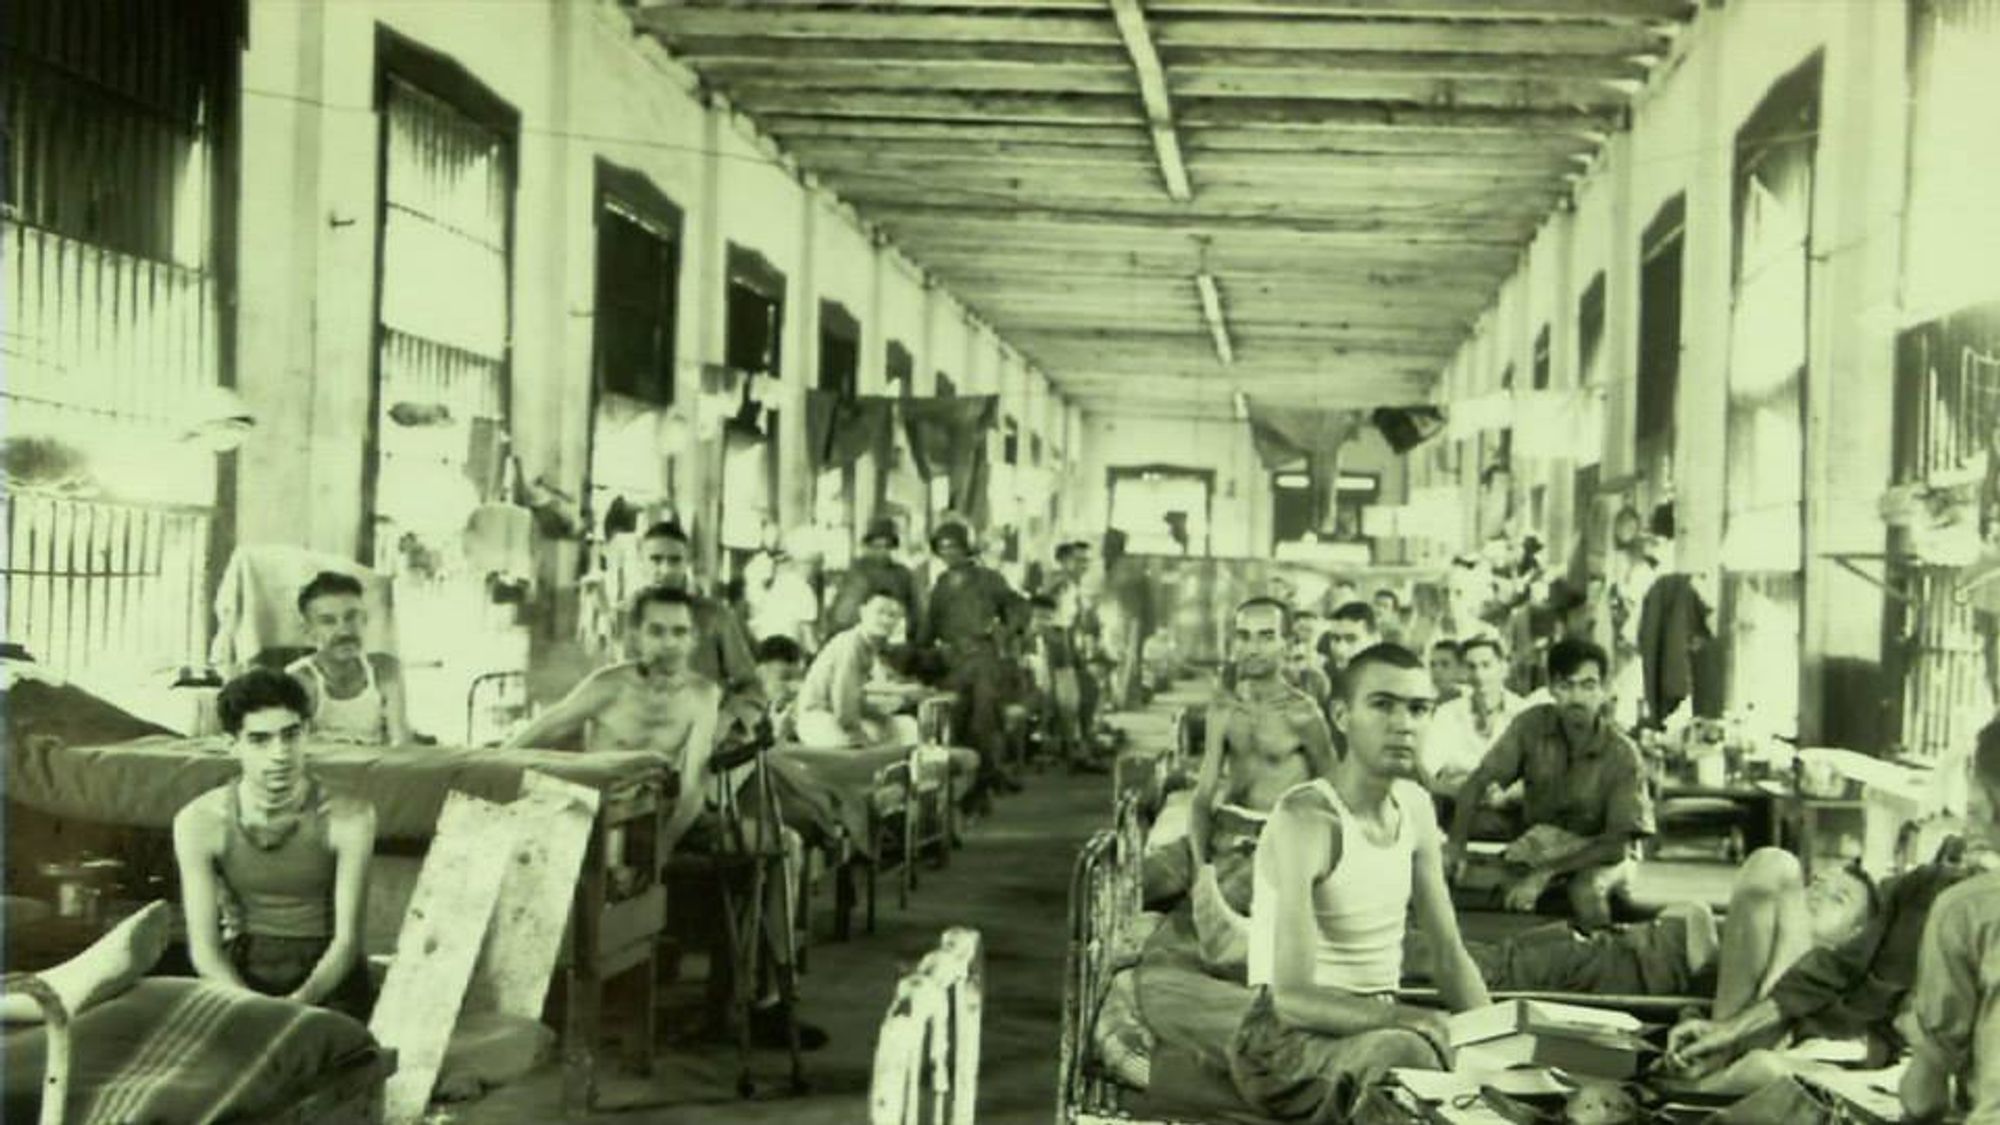 A sepia-toned image of soldiers in a prison camp. All the soldiers are facing and staring straight at the camera, with blank expressions.